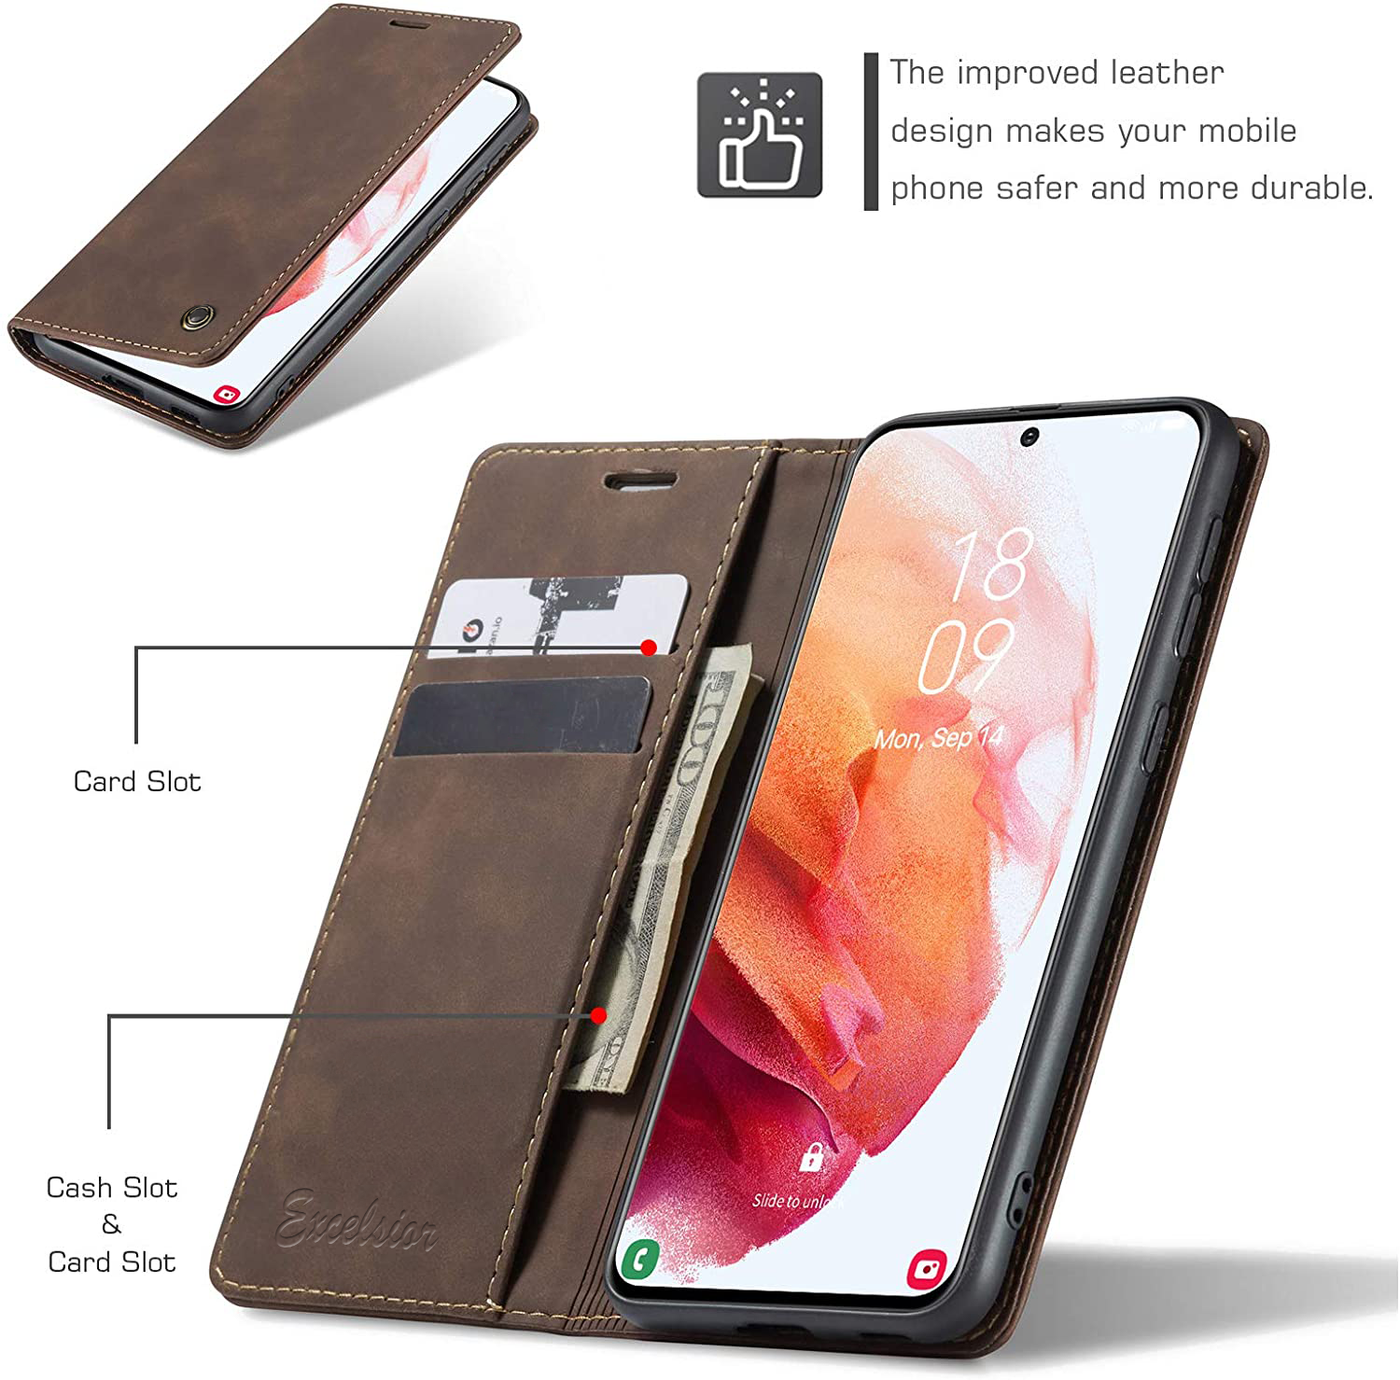 Samsung Galaxy S21 5G Leather Wallet flip case cover with card slots by Excelsior